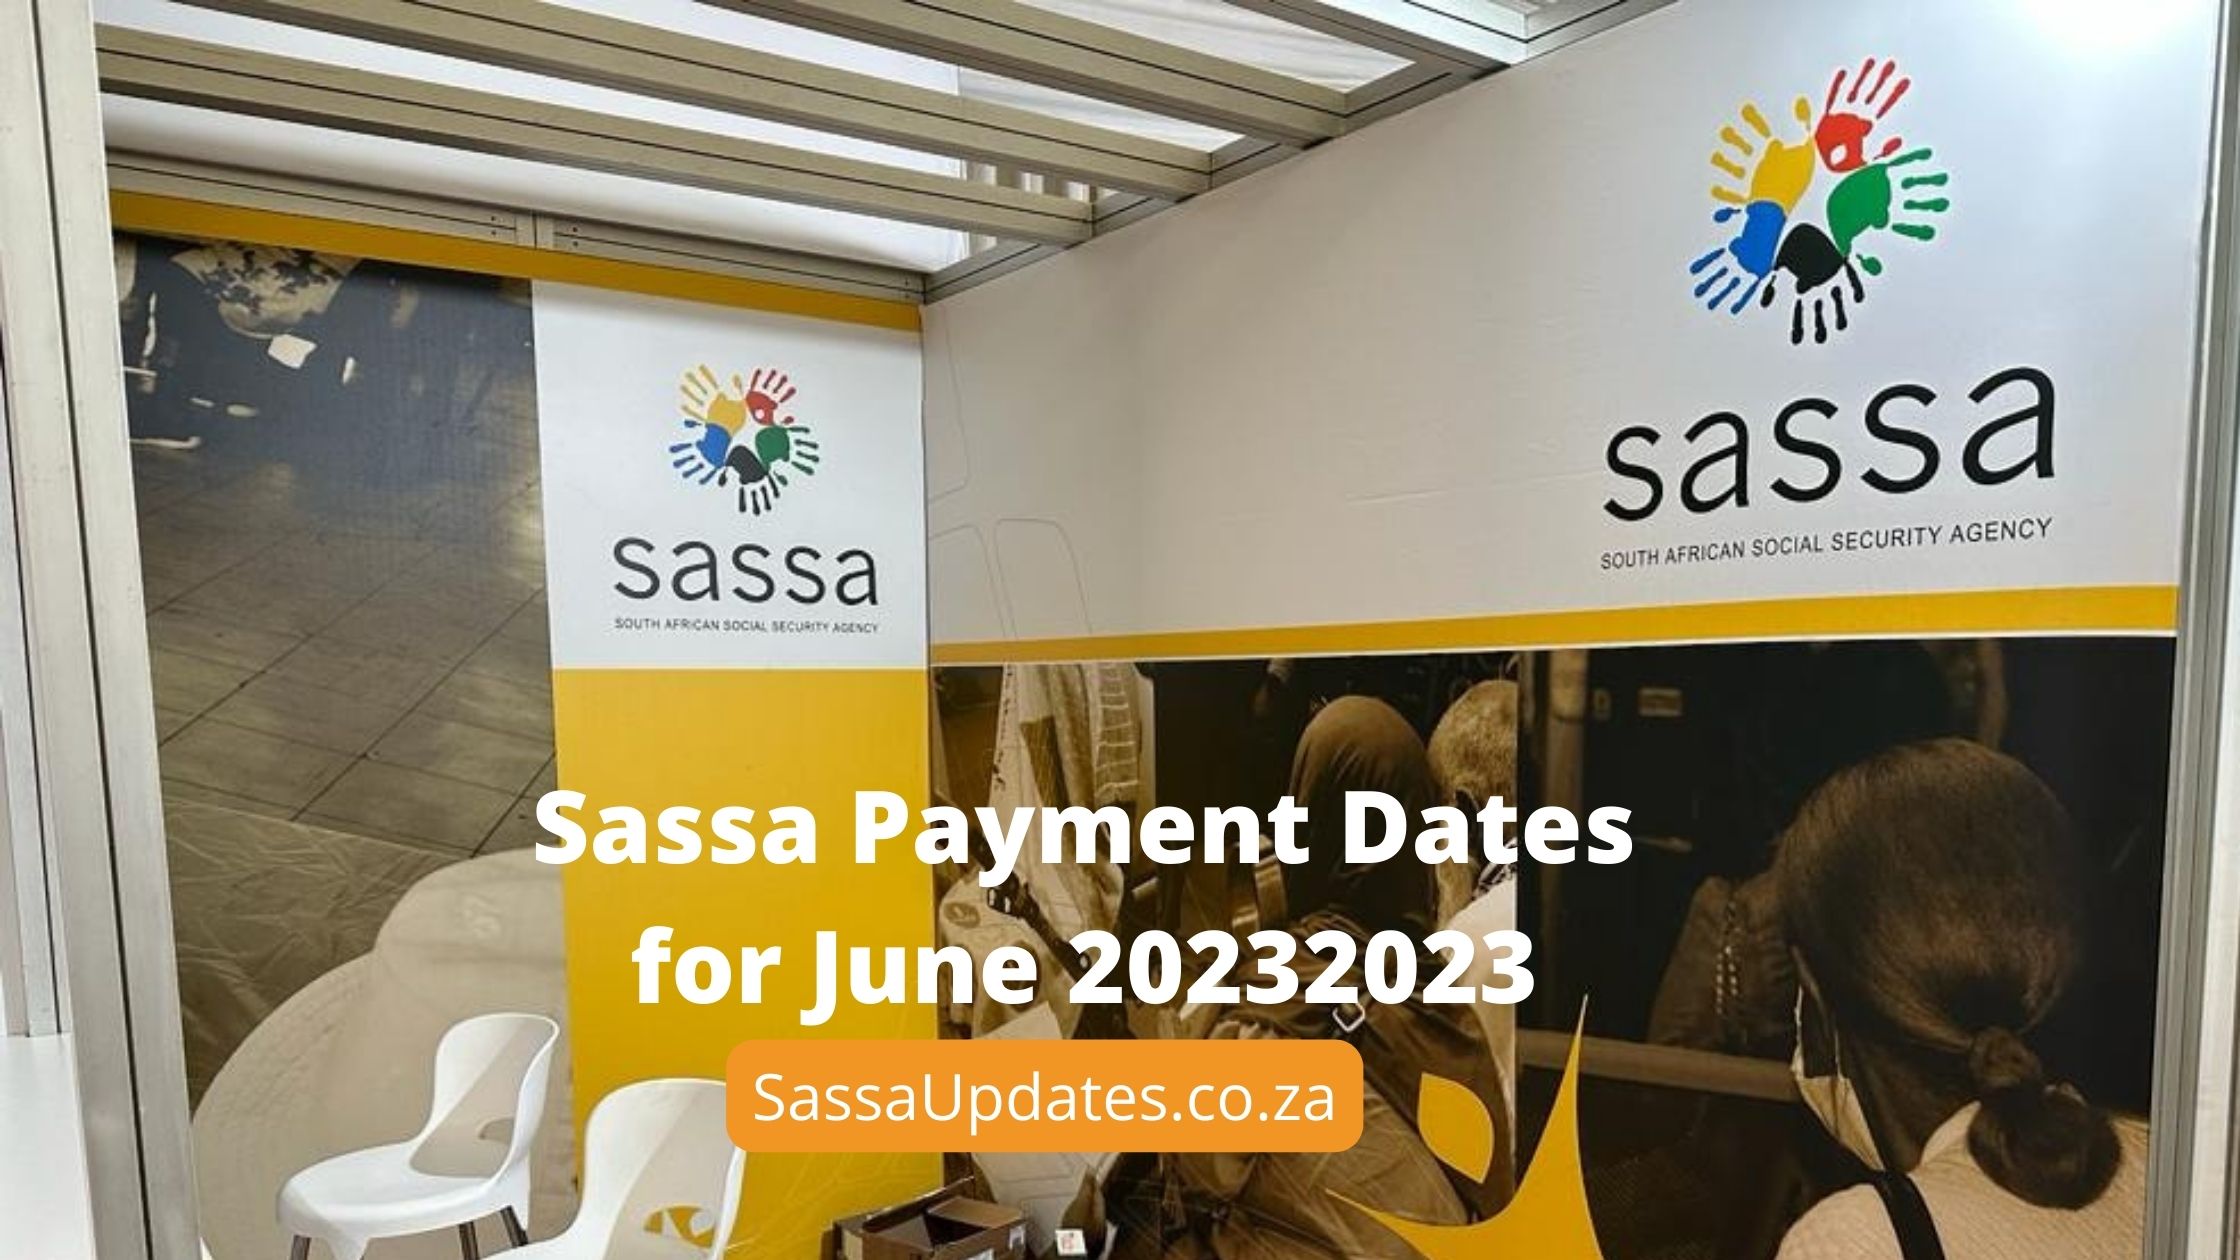 Sassa Payment Dates for June 2023